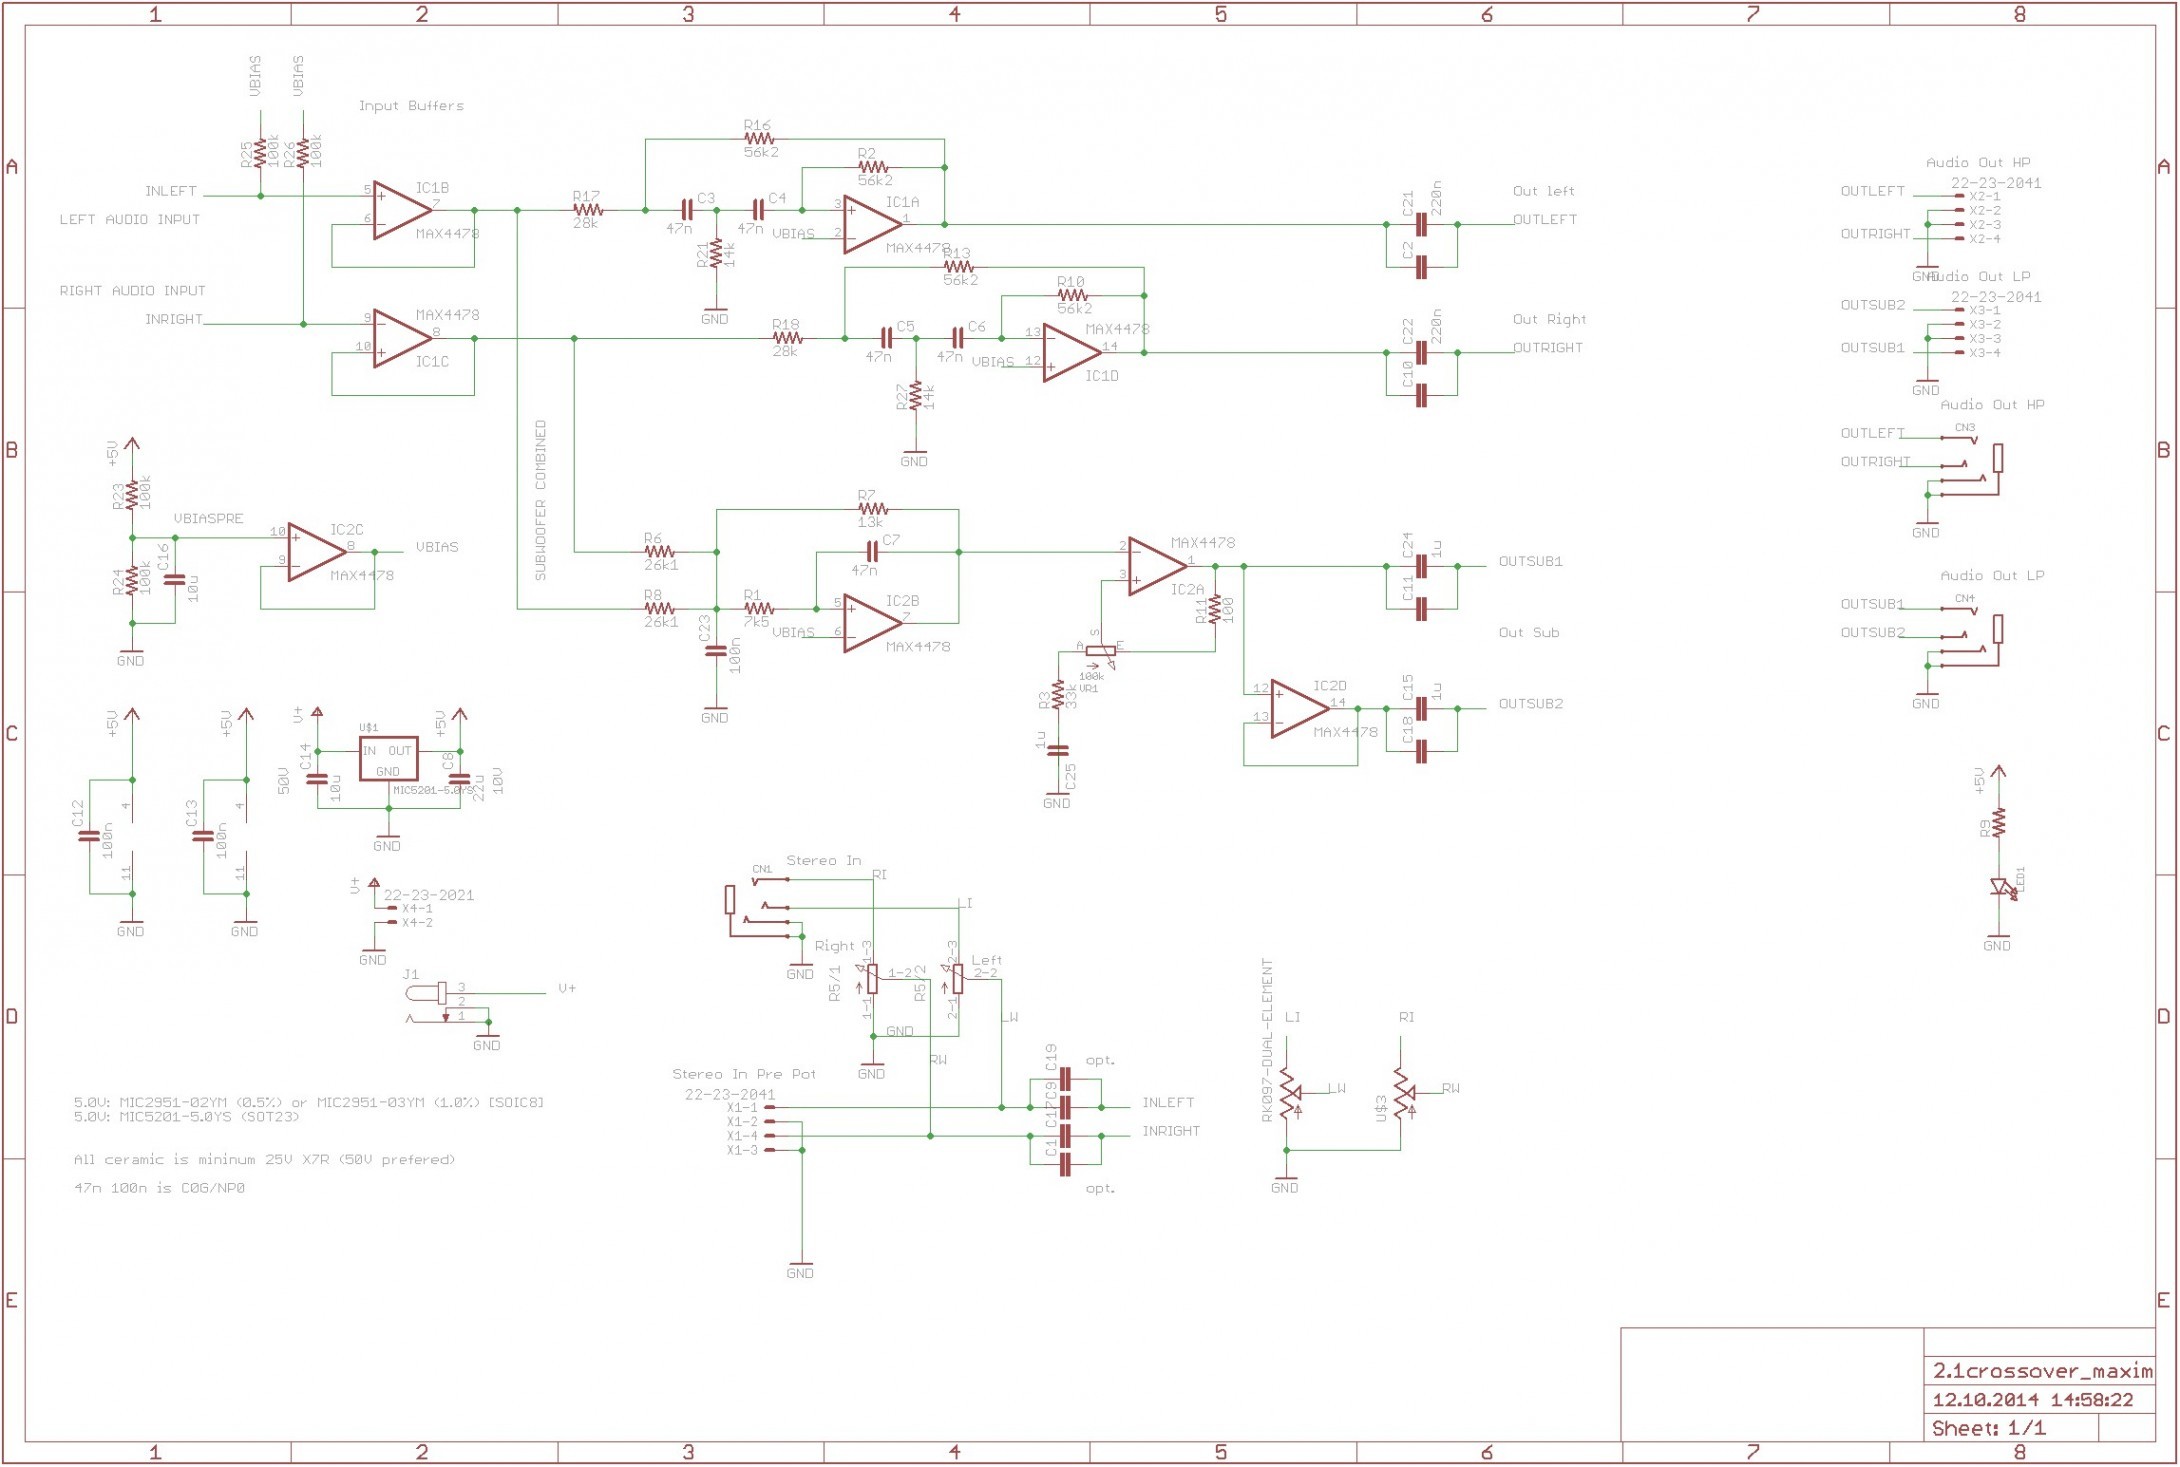 Aktive Crossoverfrequenzweiche Mit Max4478 360customs Crossover Schematic Rev 0d wiring lighting circuit scr circuit